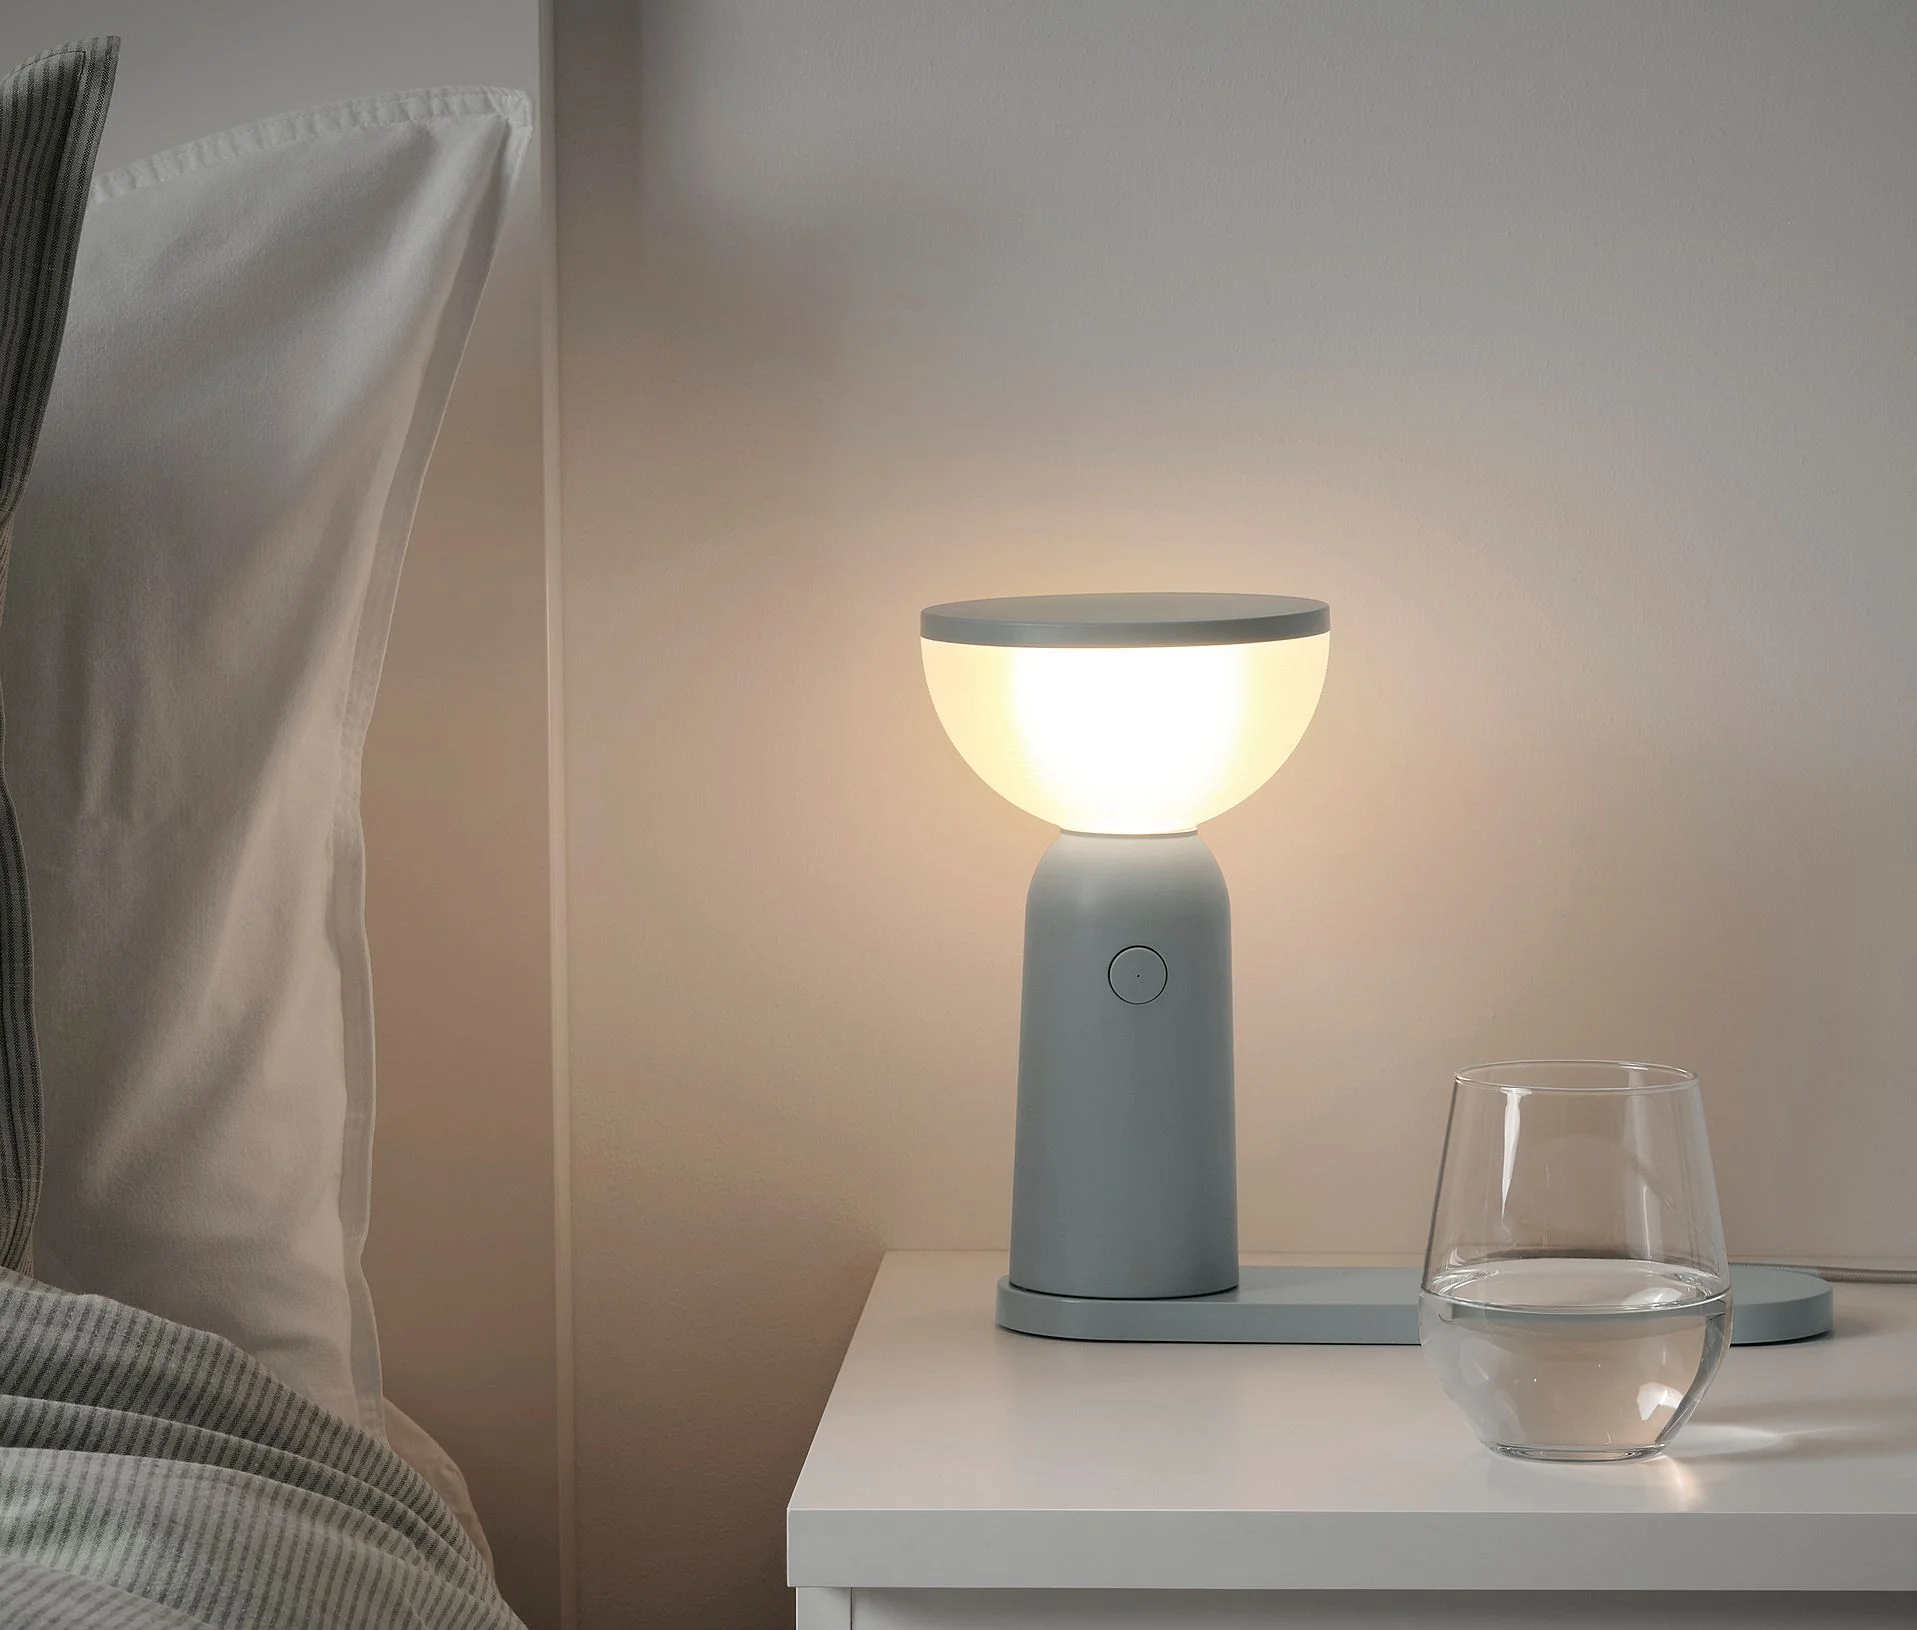 IKEA has released a lamp with wireless charging